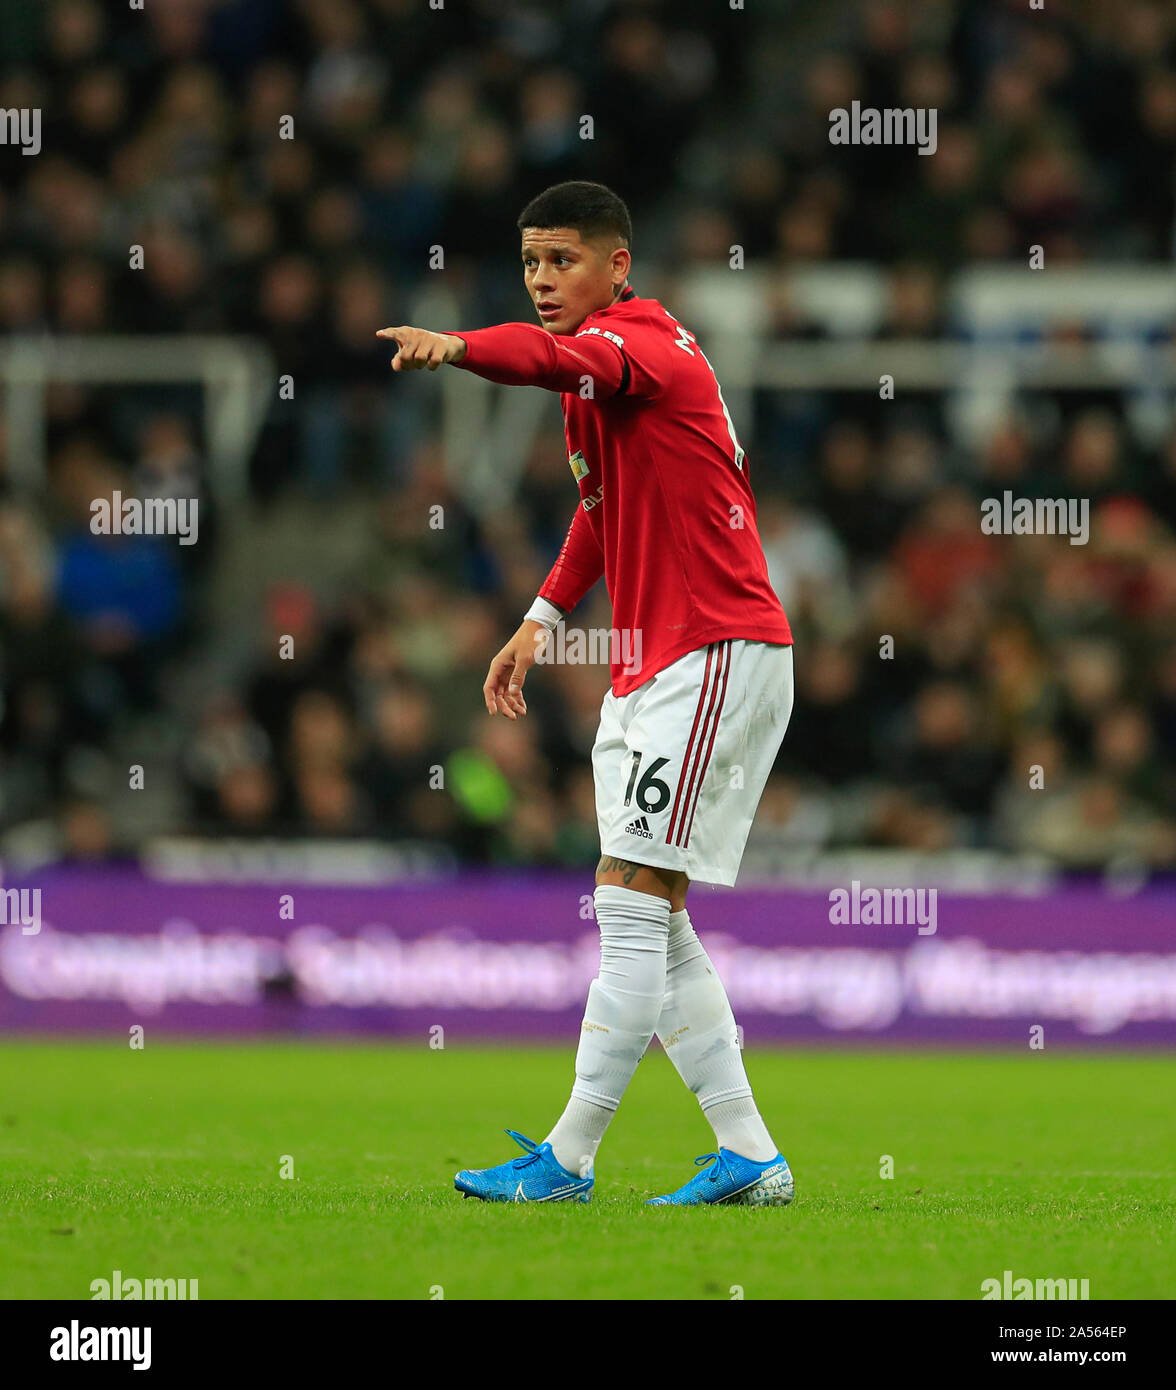 6th October 2019, St. James's Park, Newcastle, England; Premier League, Newcastle United v Manchester United :Marcos Rojo (16) of Manchester United Credit: Conor Molloy/News Images Stock Photo